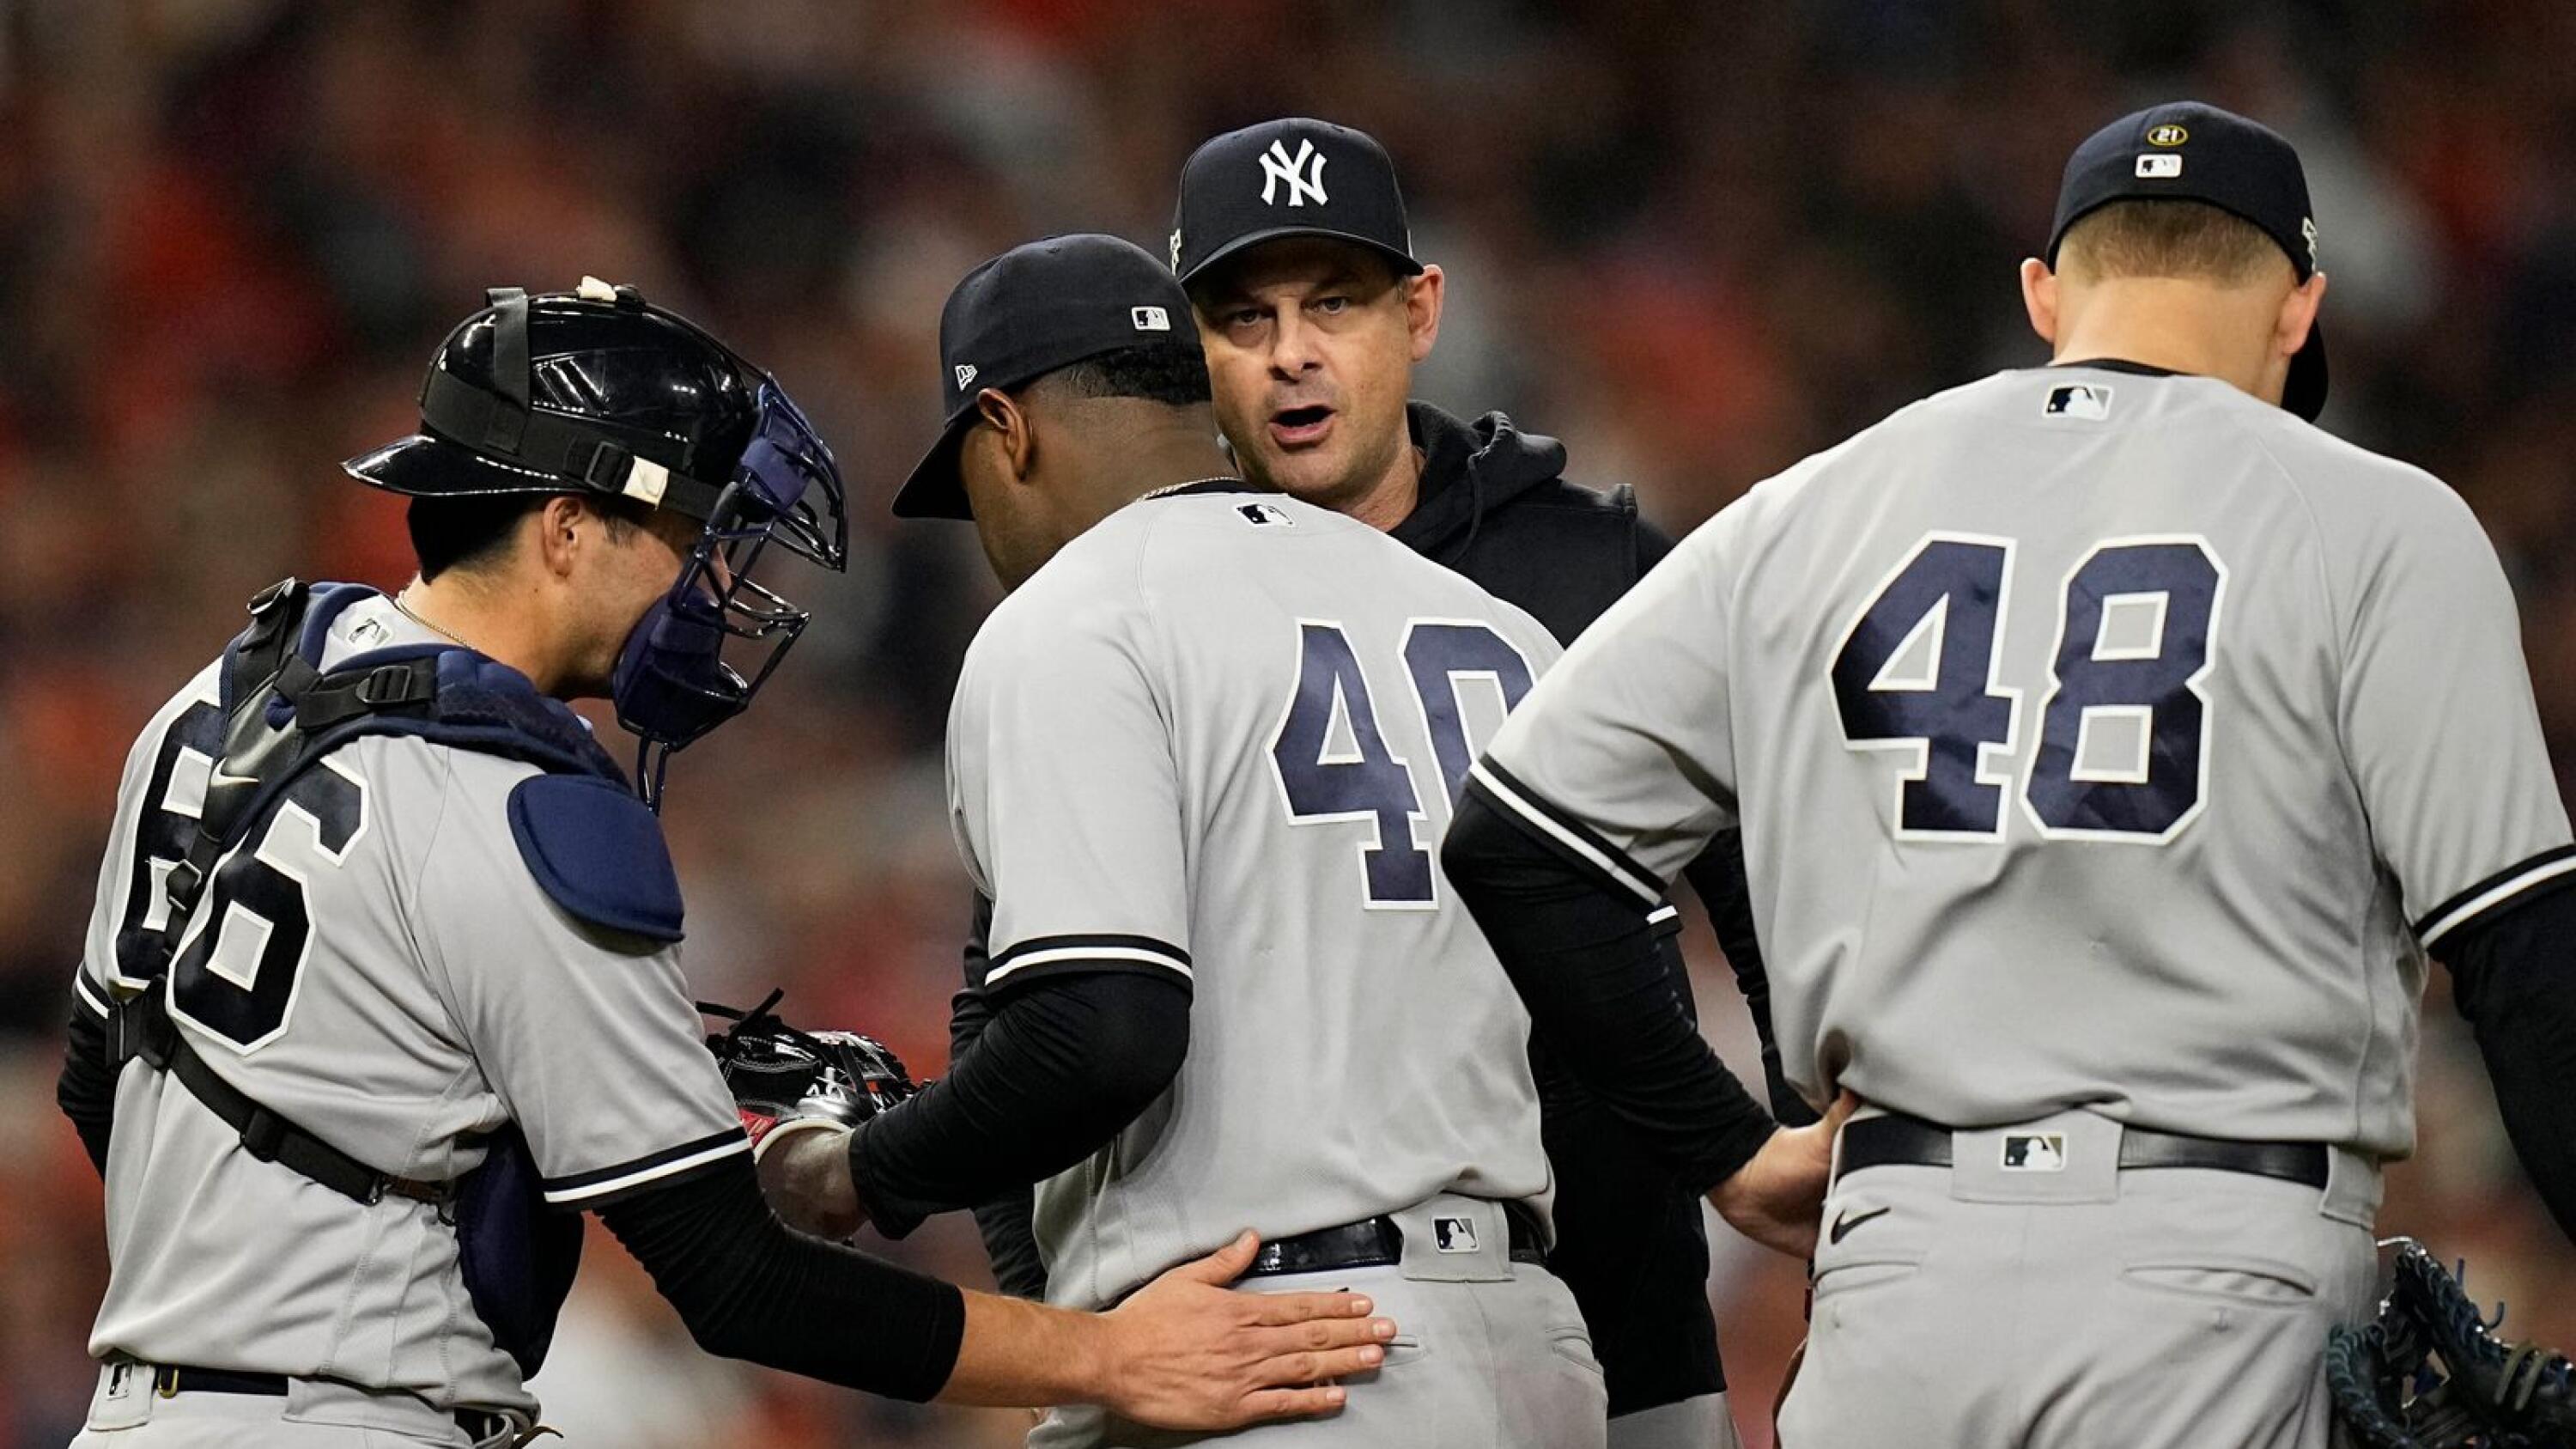 5 games that have defined the Yankees-Astros playoff rivalry